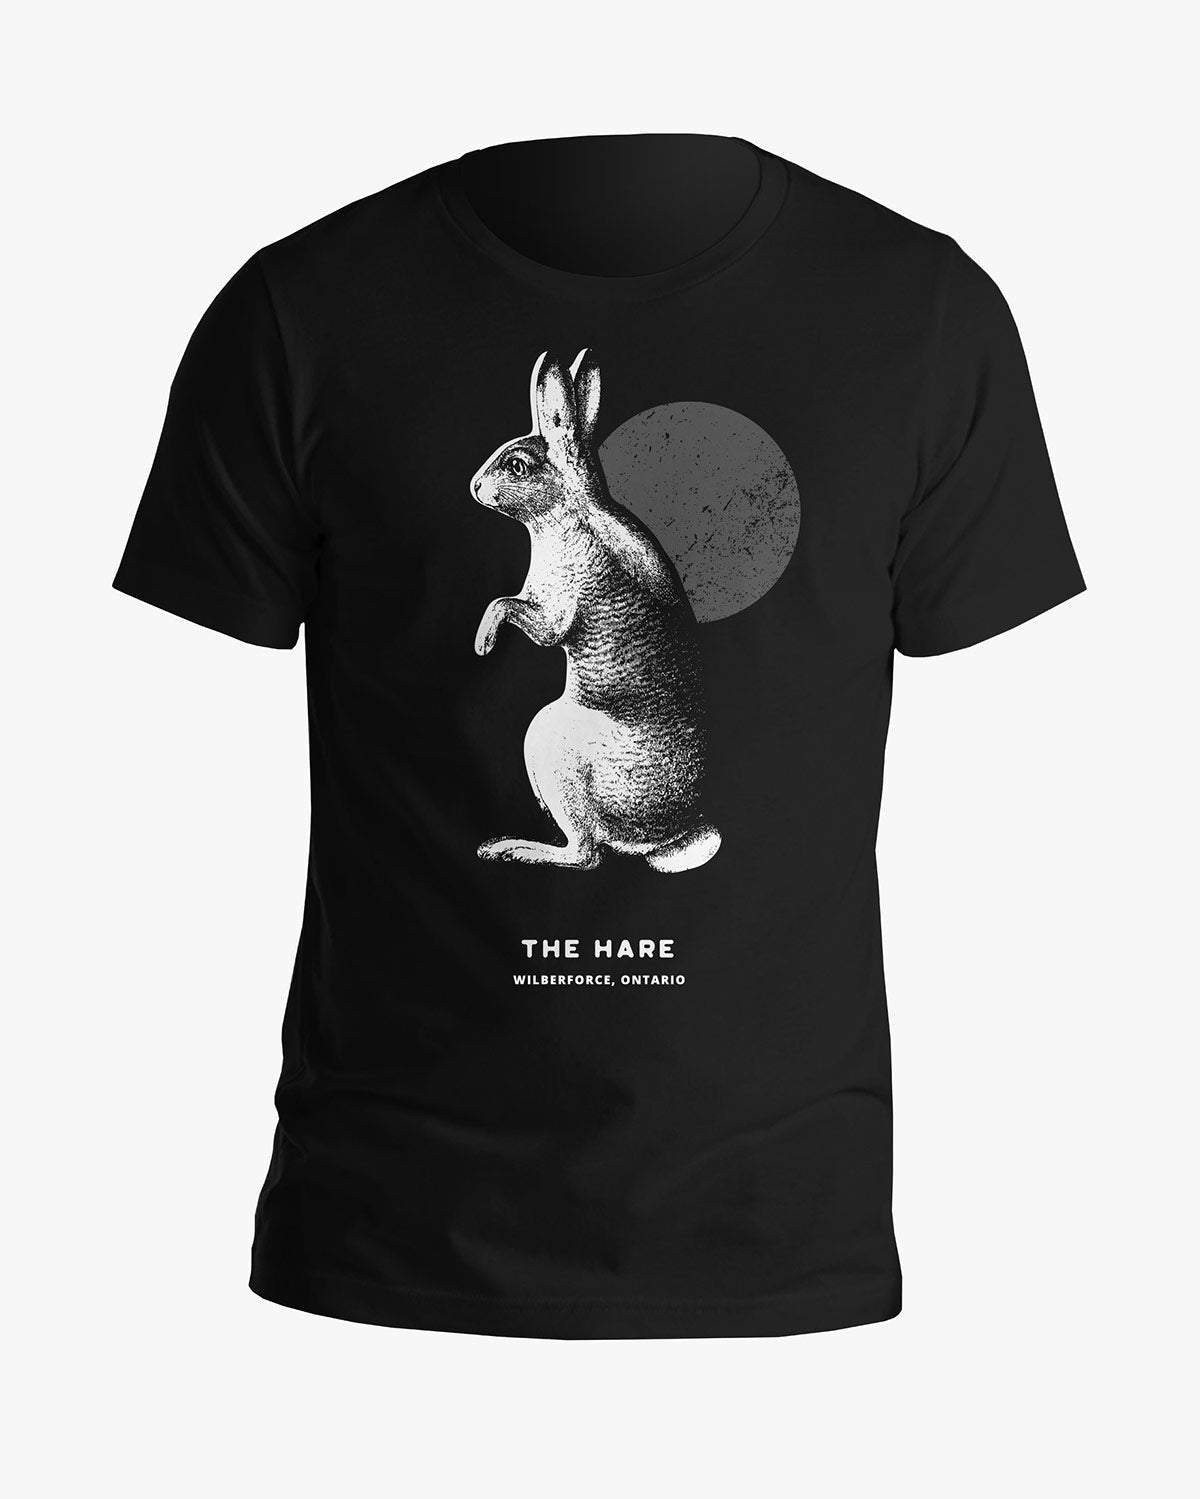 The Hare - Wilberforce - Tee